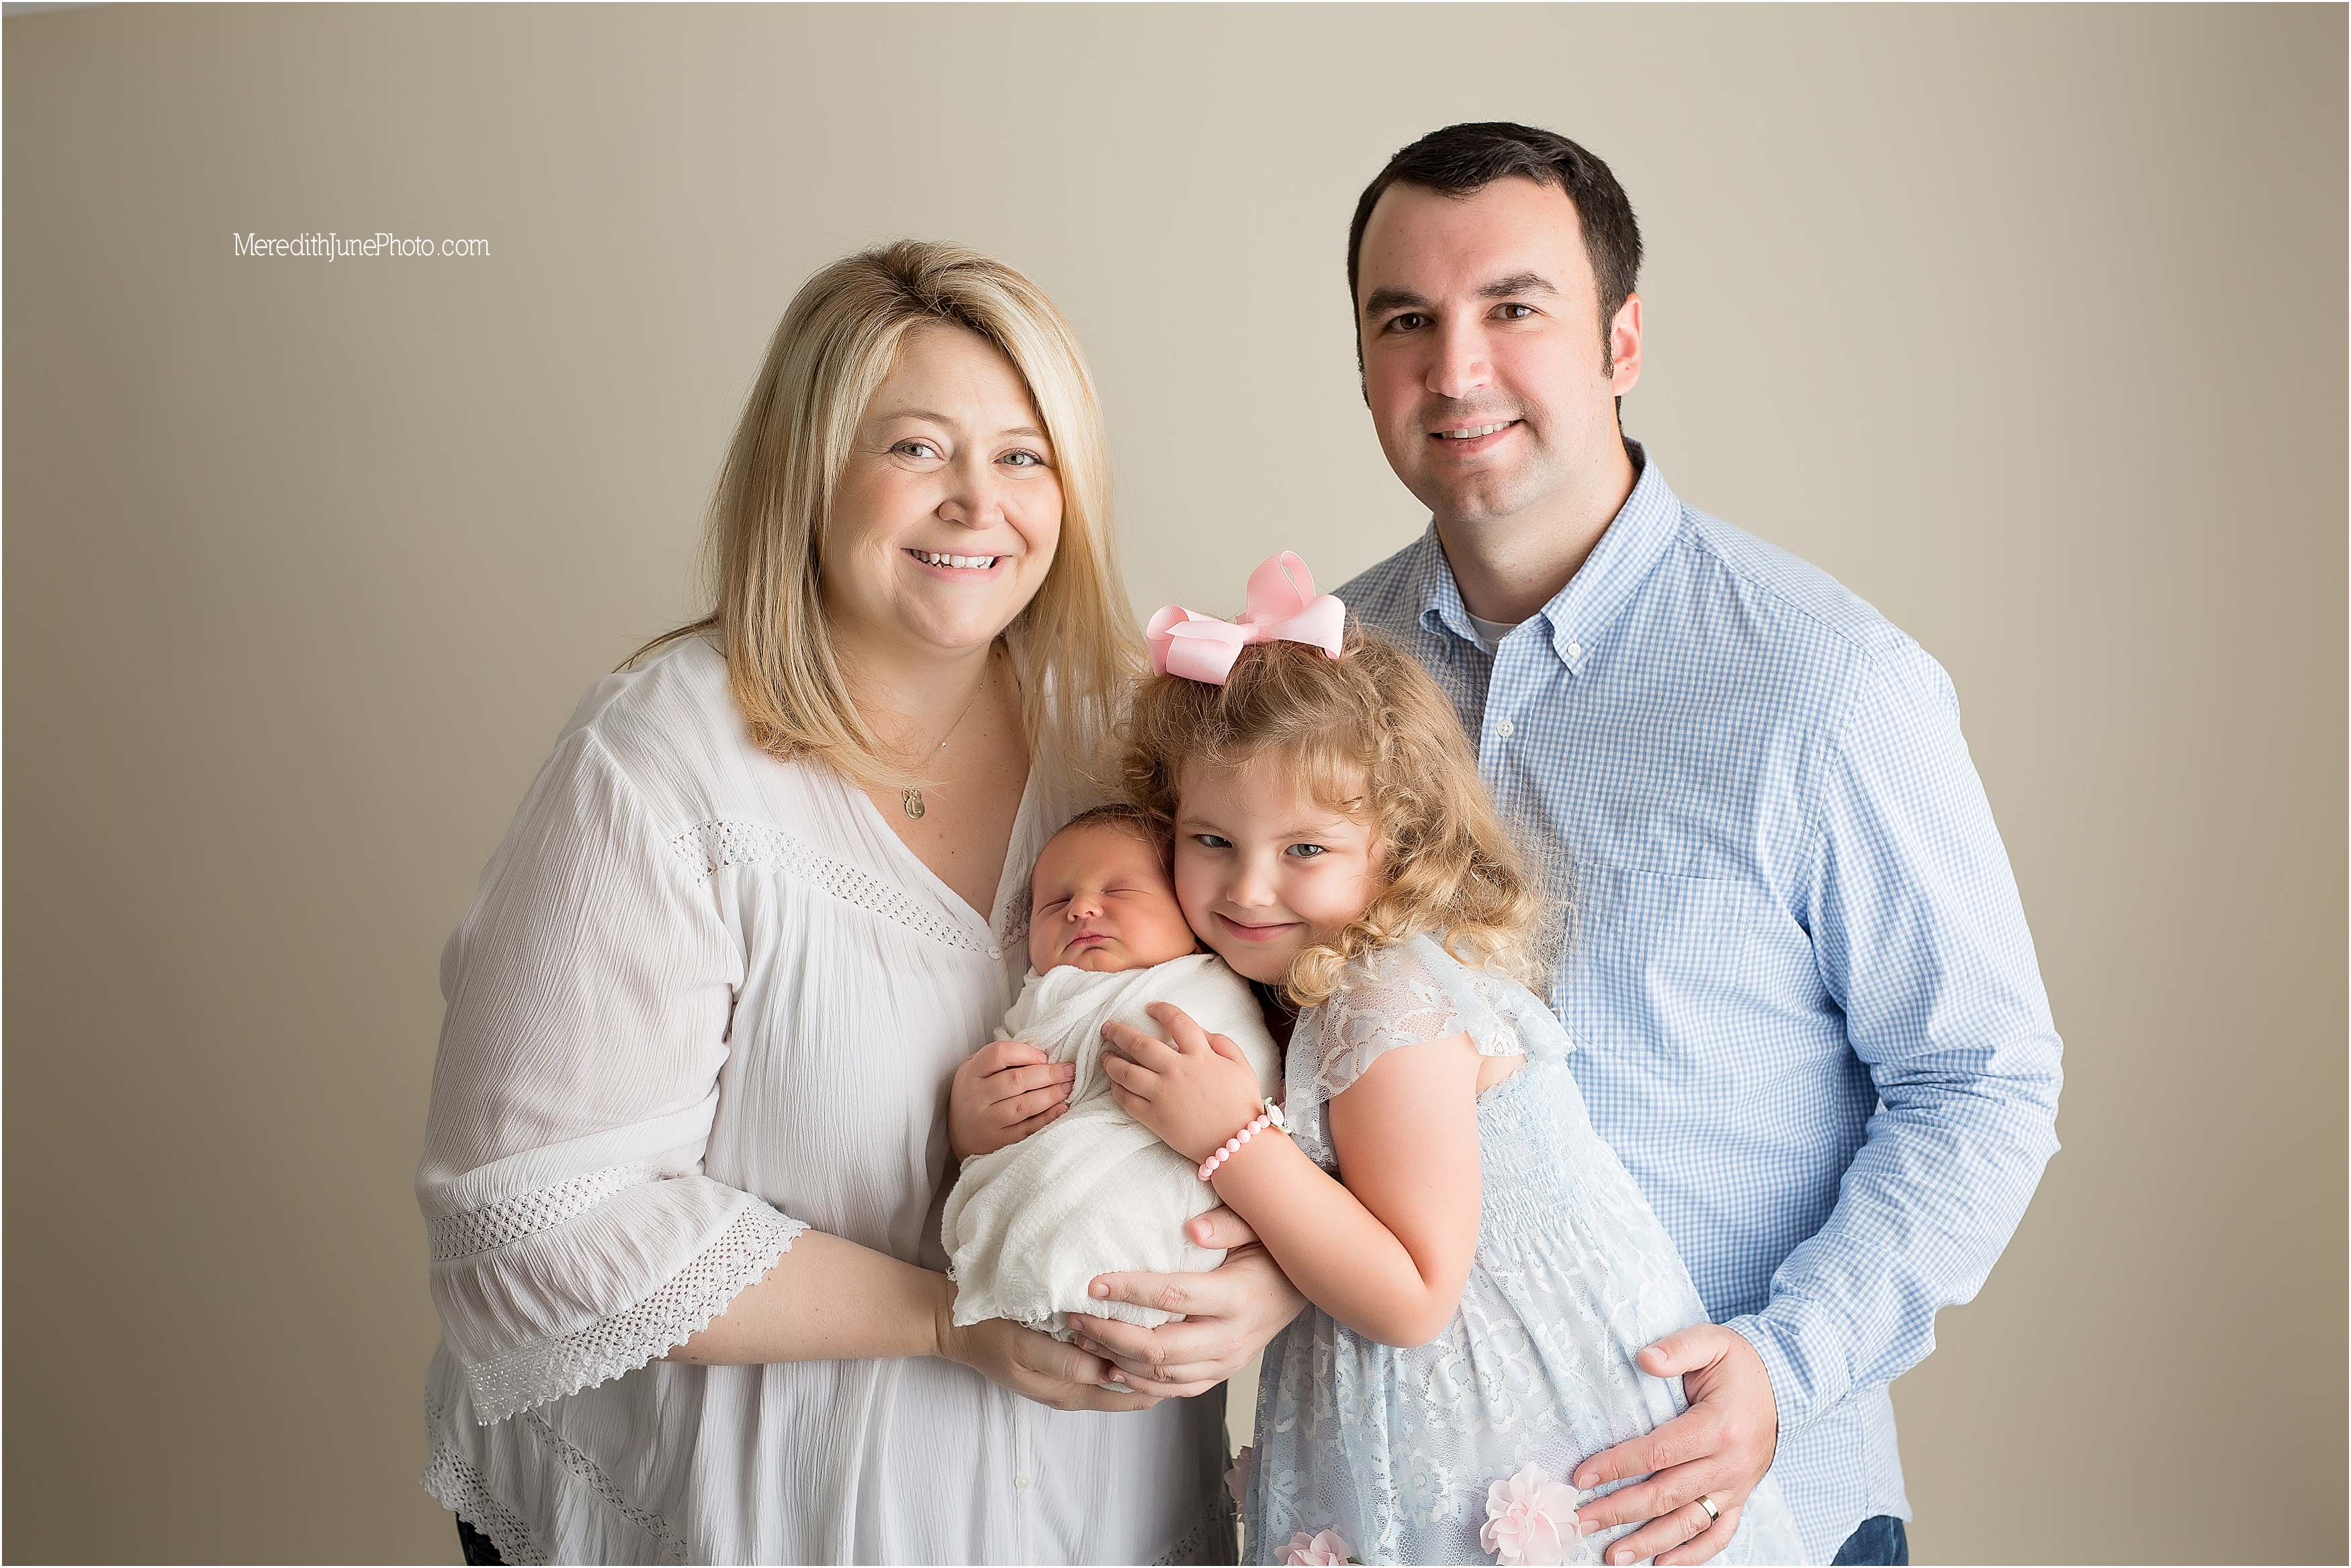 Baby Max and family at meredith june photography